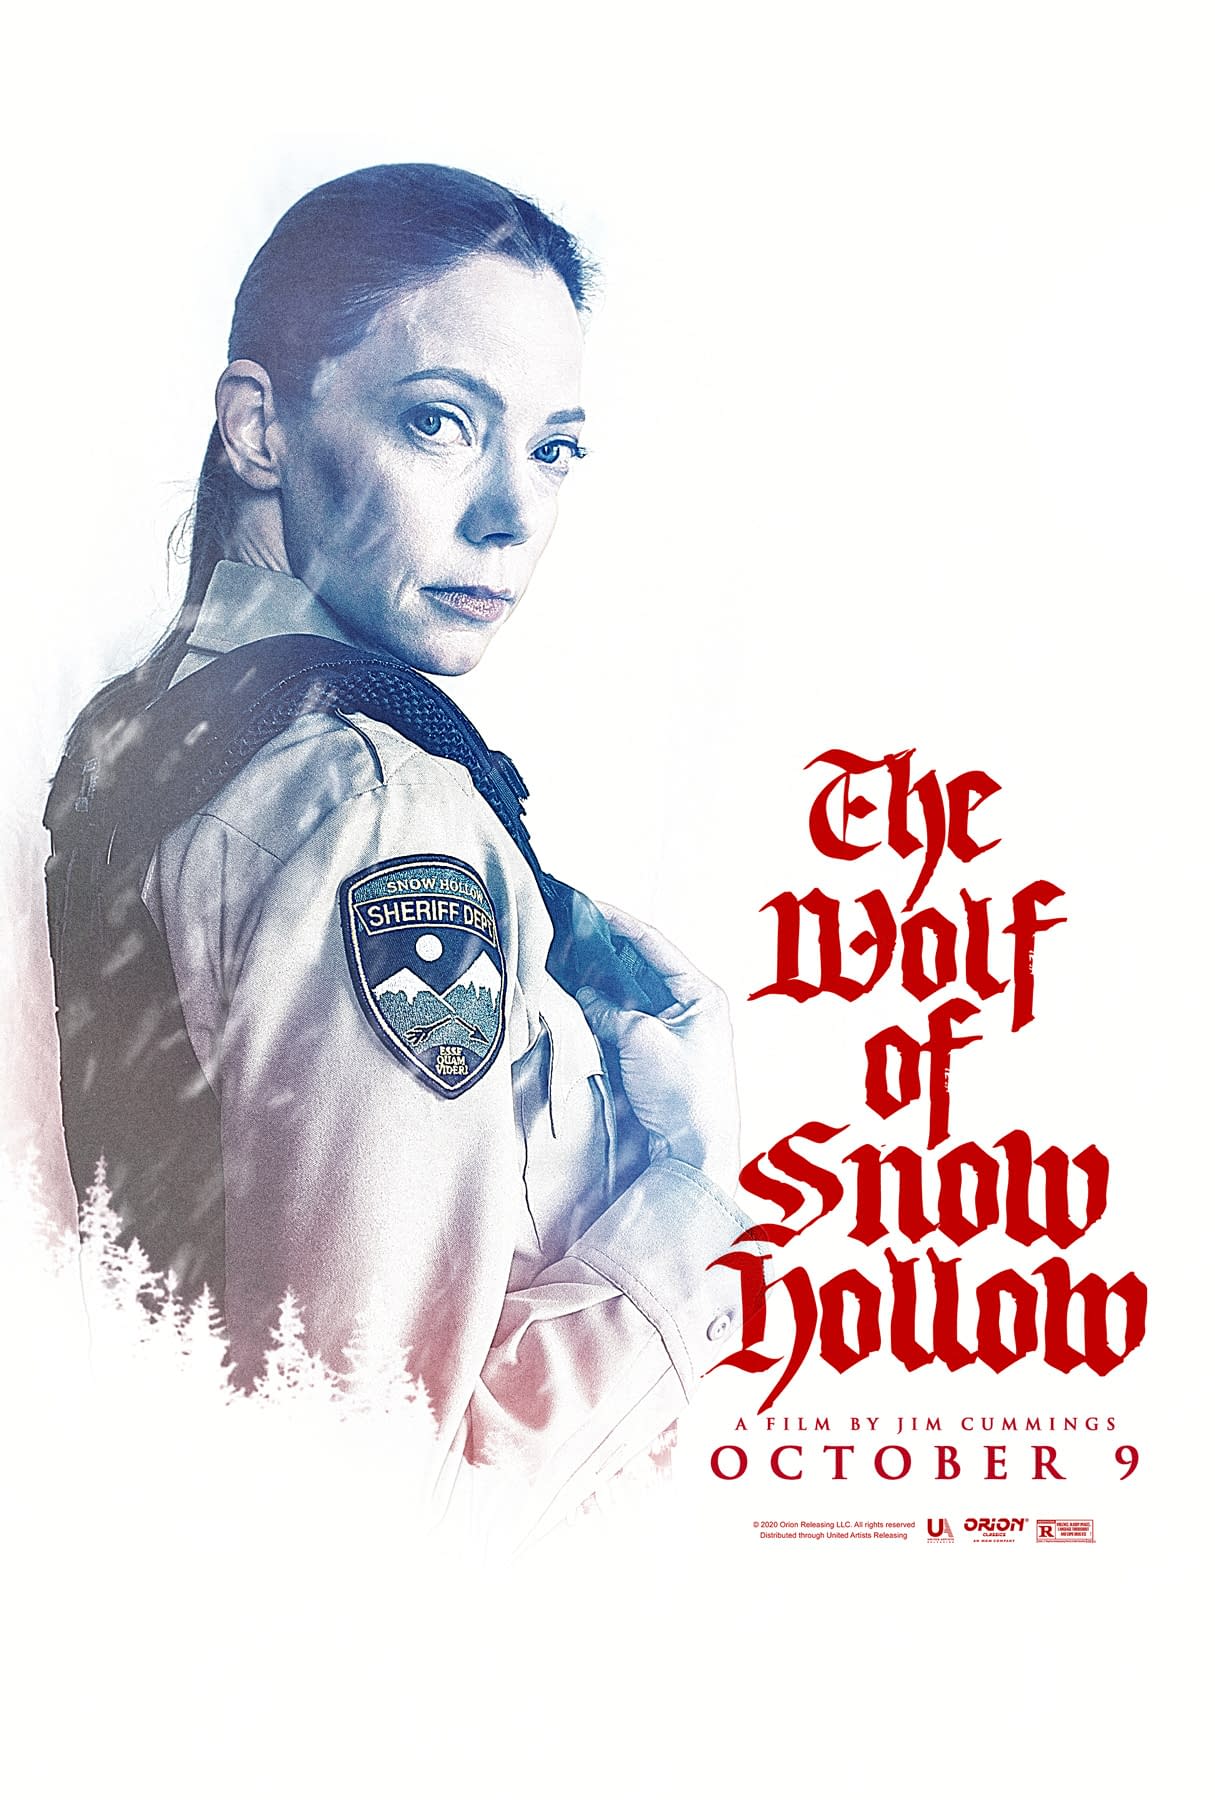 New Clip And Posters From The Wolf Of Snow Hollow Debut